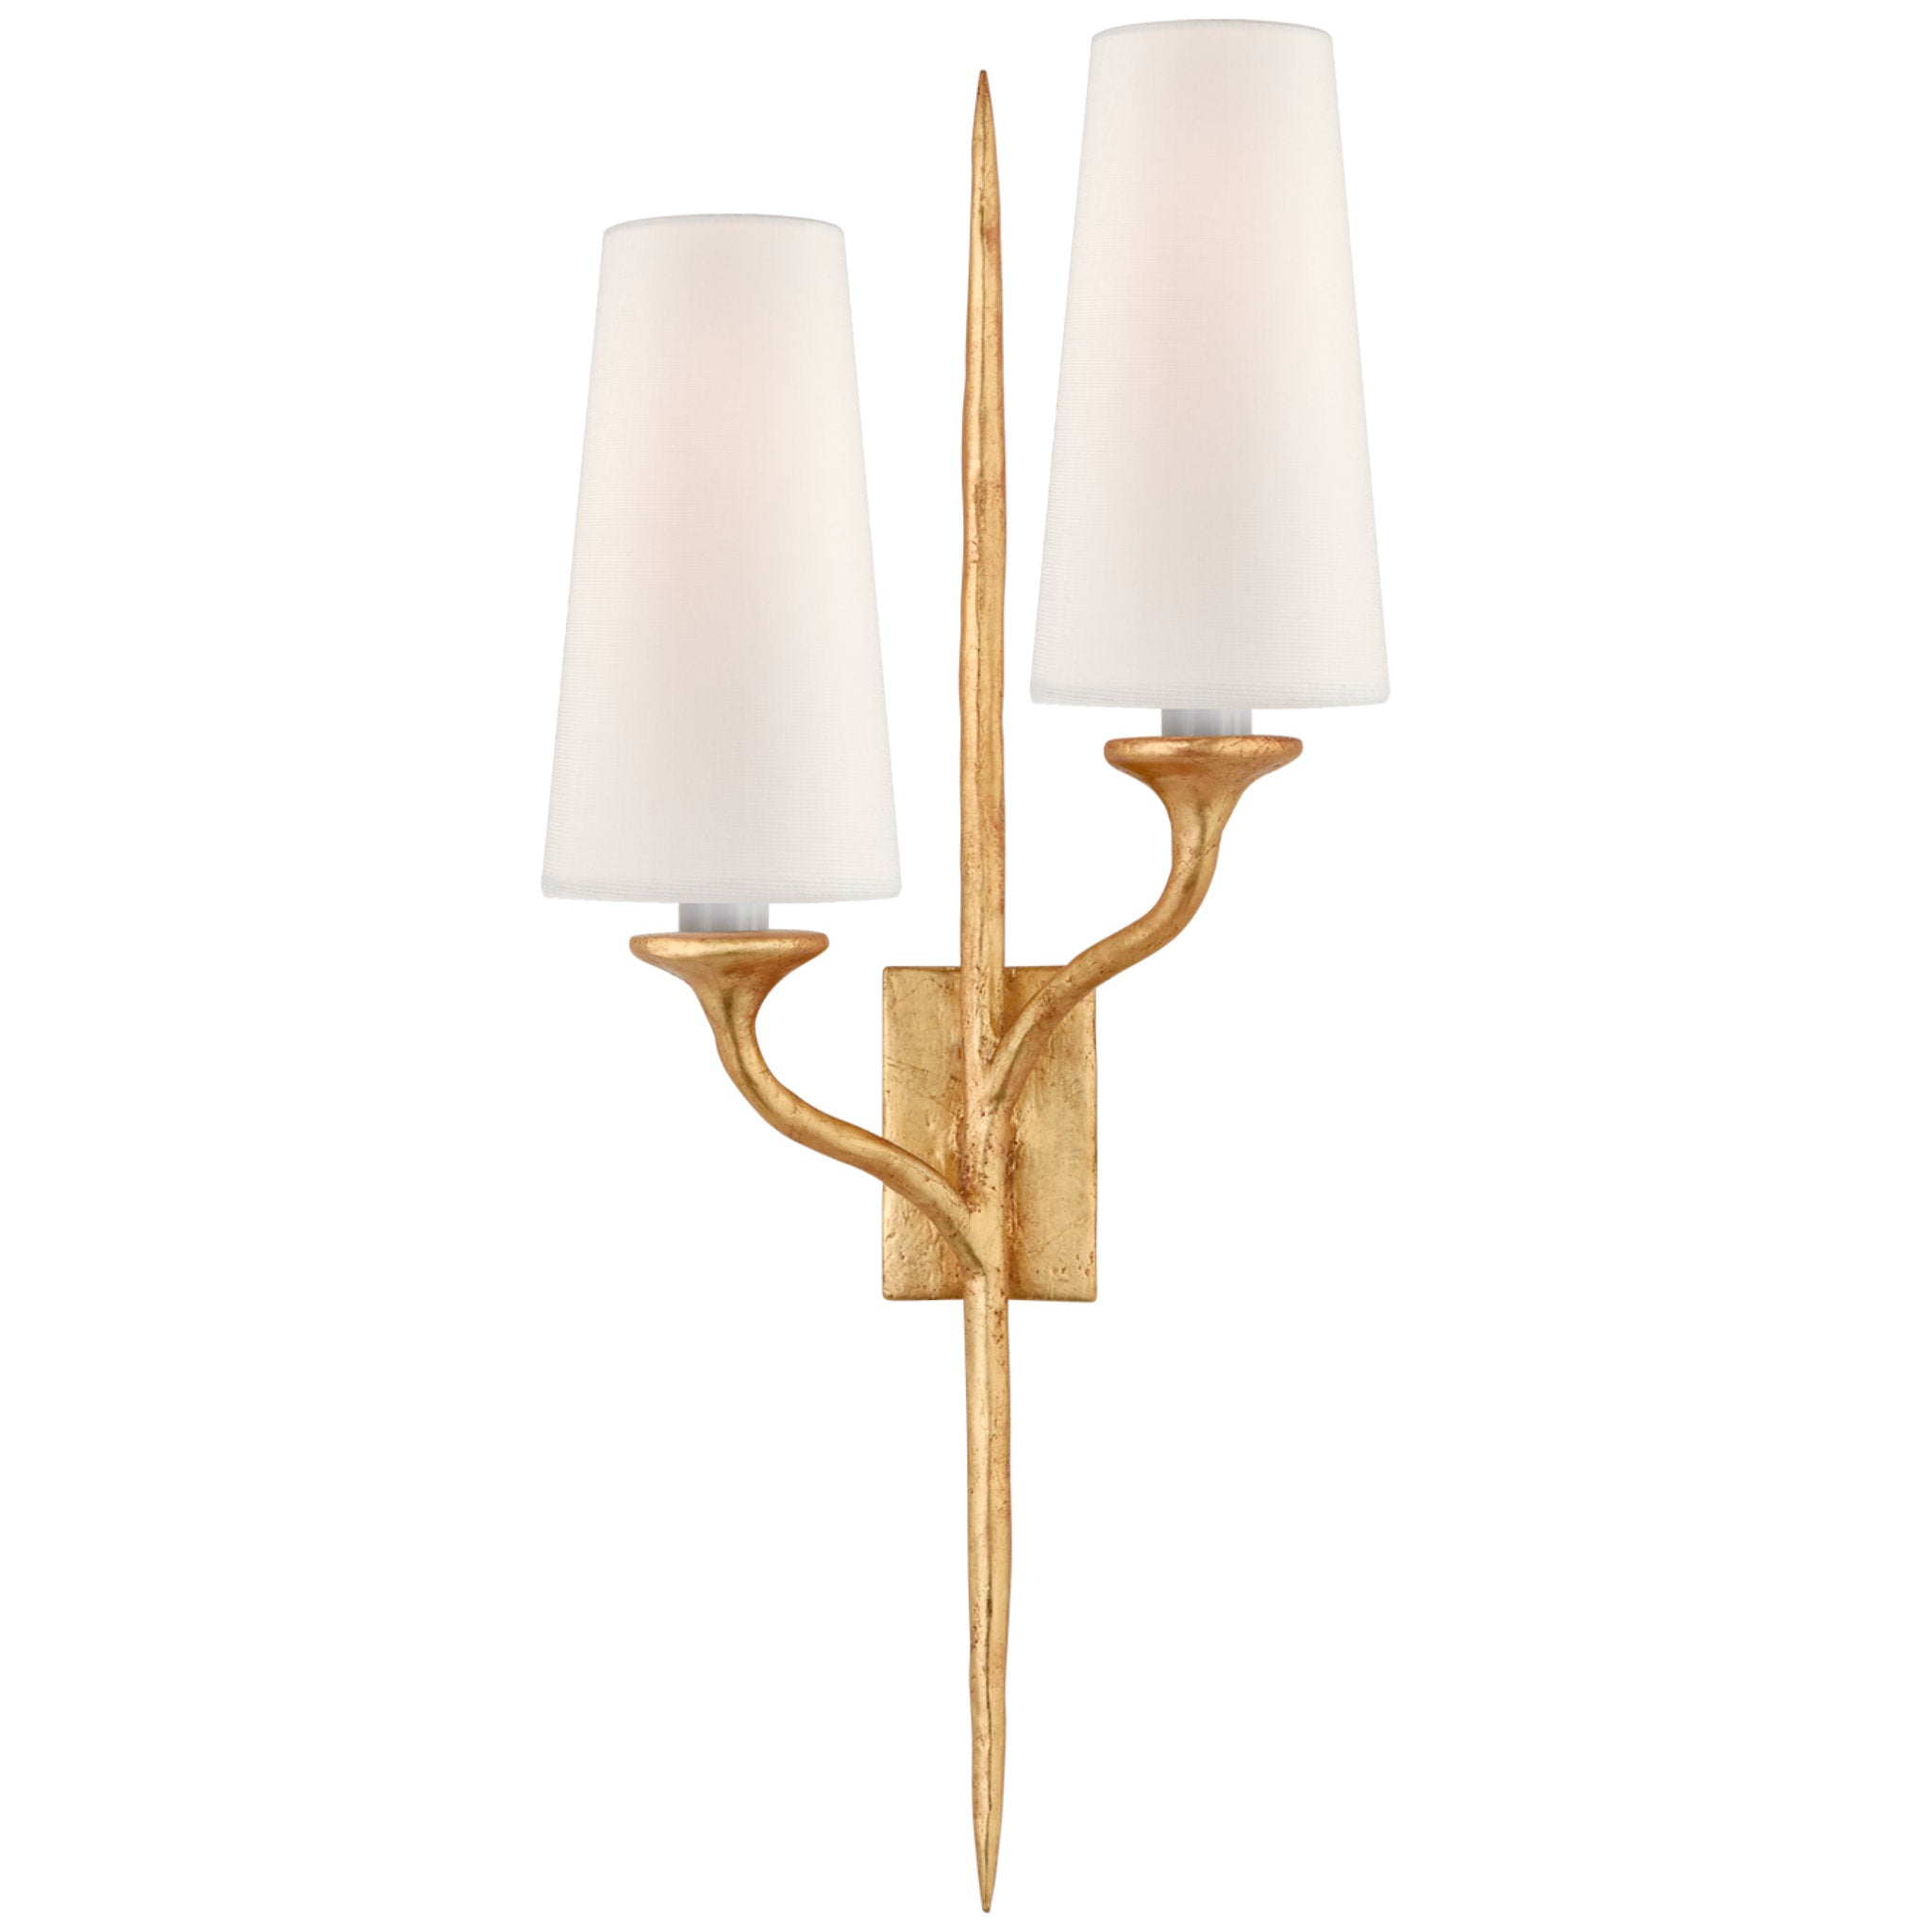 Julie Neill Iberia Double Right Sconce in Antique Gold Leaf with Linen Shades